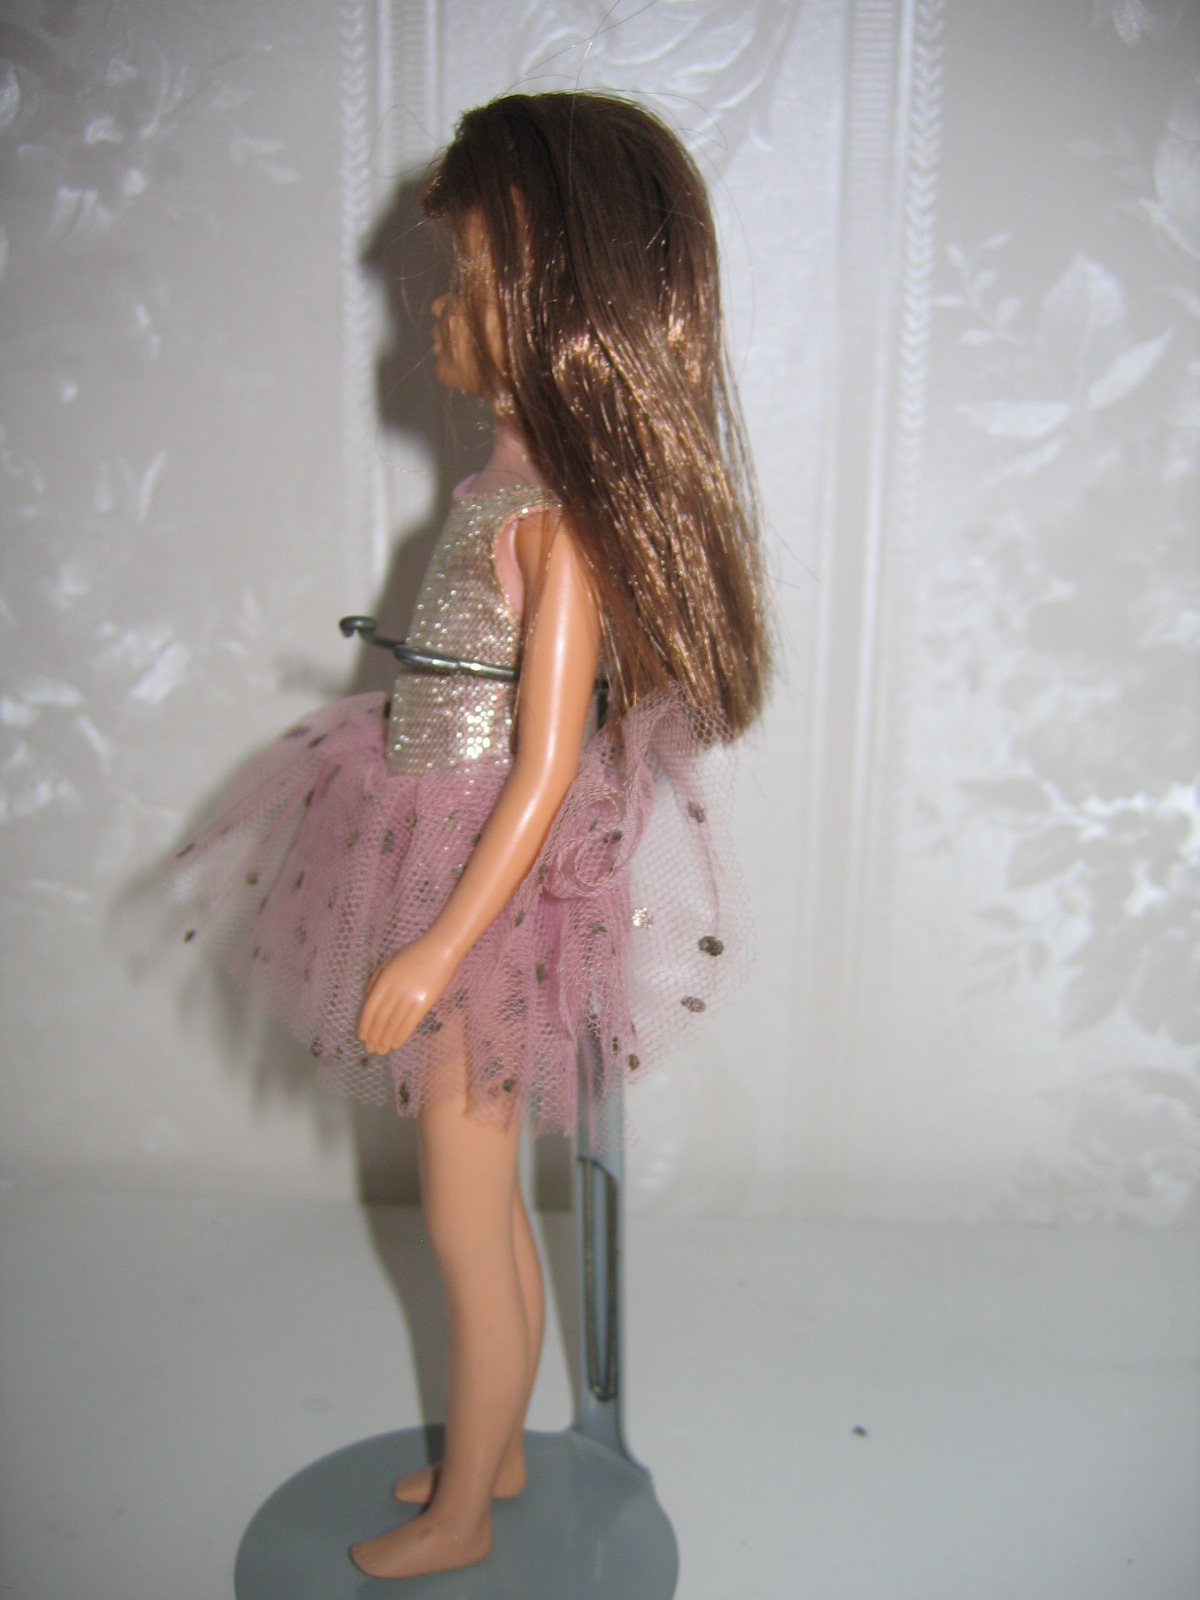 Vintage 1960s Ballerina Barbie Collectible Doll Item 499 For Sale 